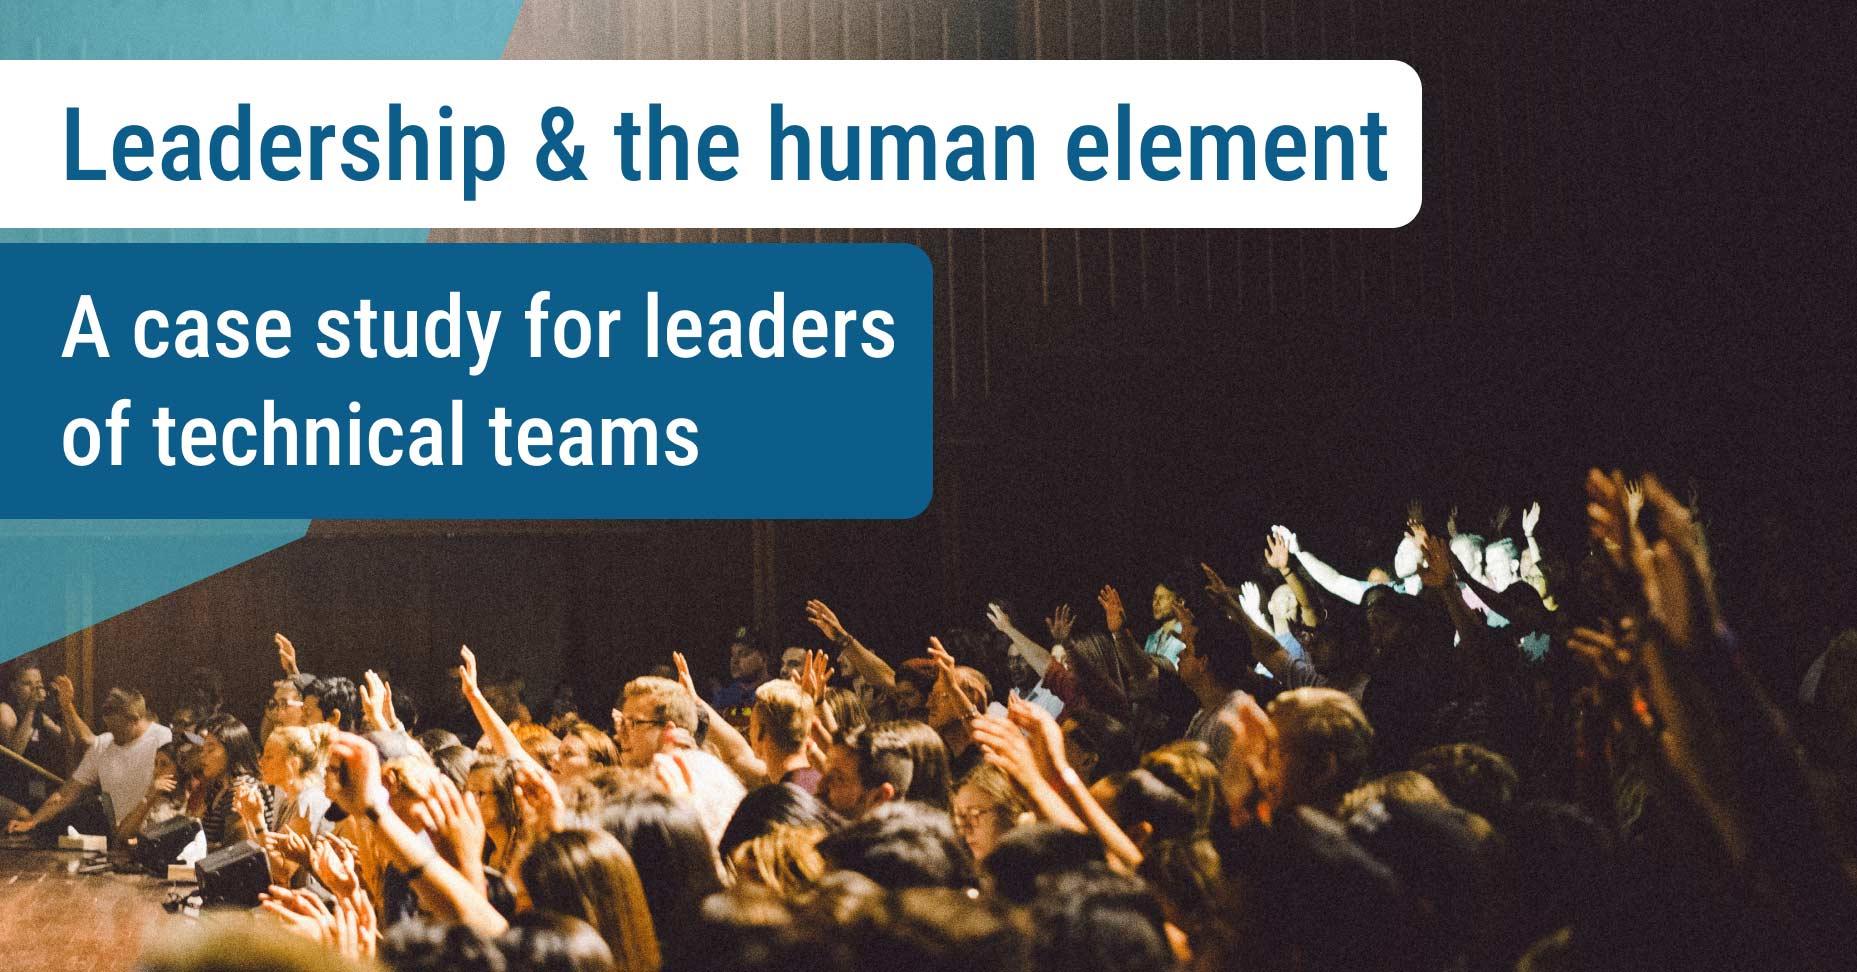 Leadership & the human element A case study for leaders of technical teams